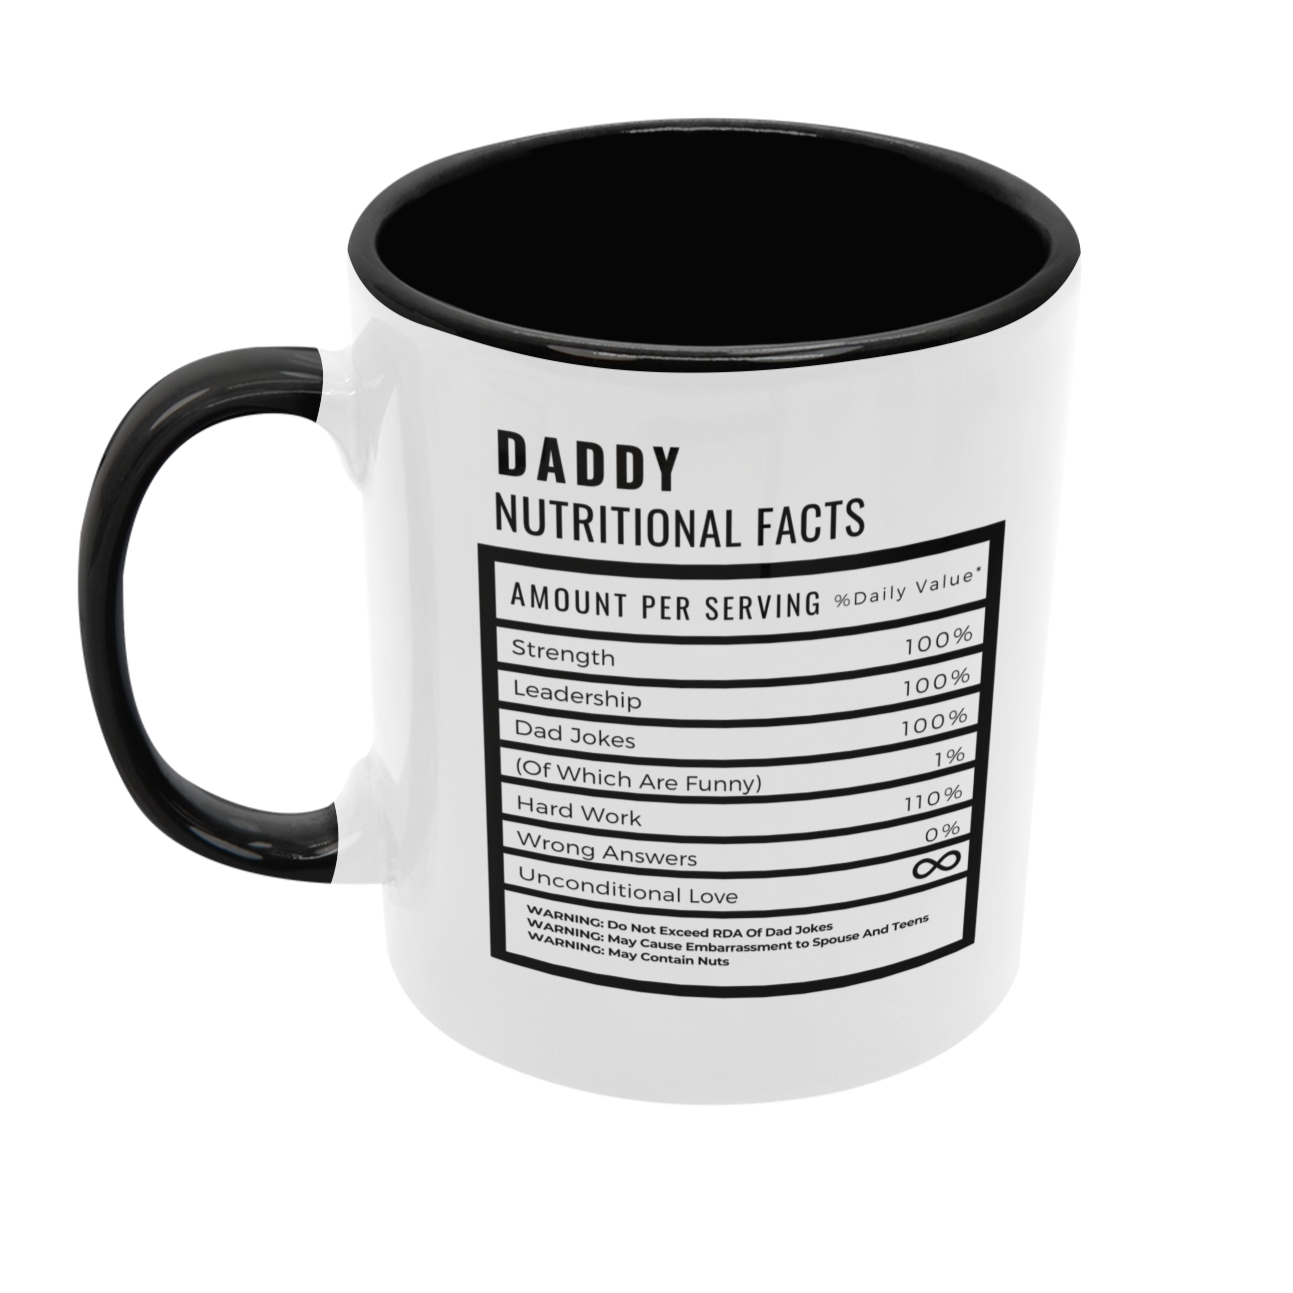 Mug with Colored rim and inside "Daddy Nutritional Facts"